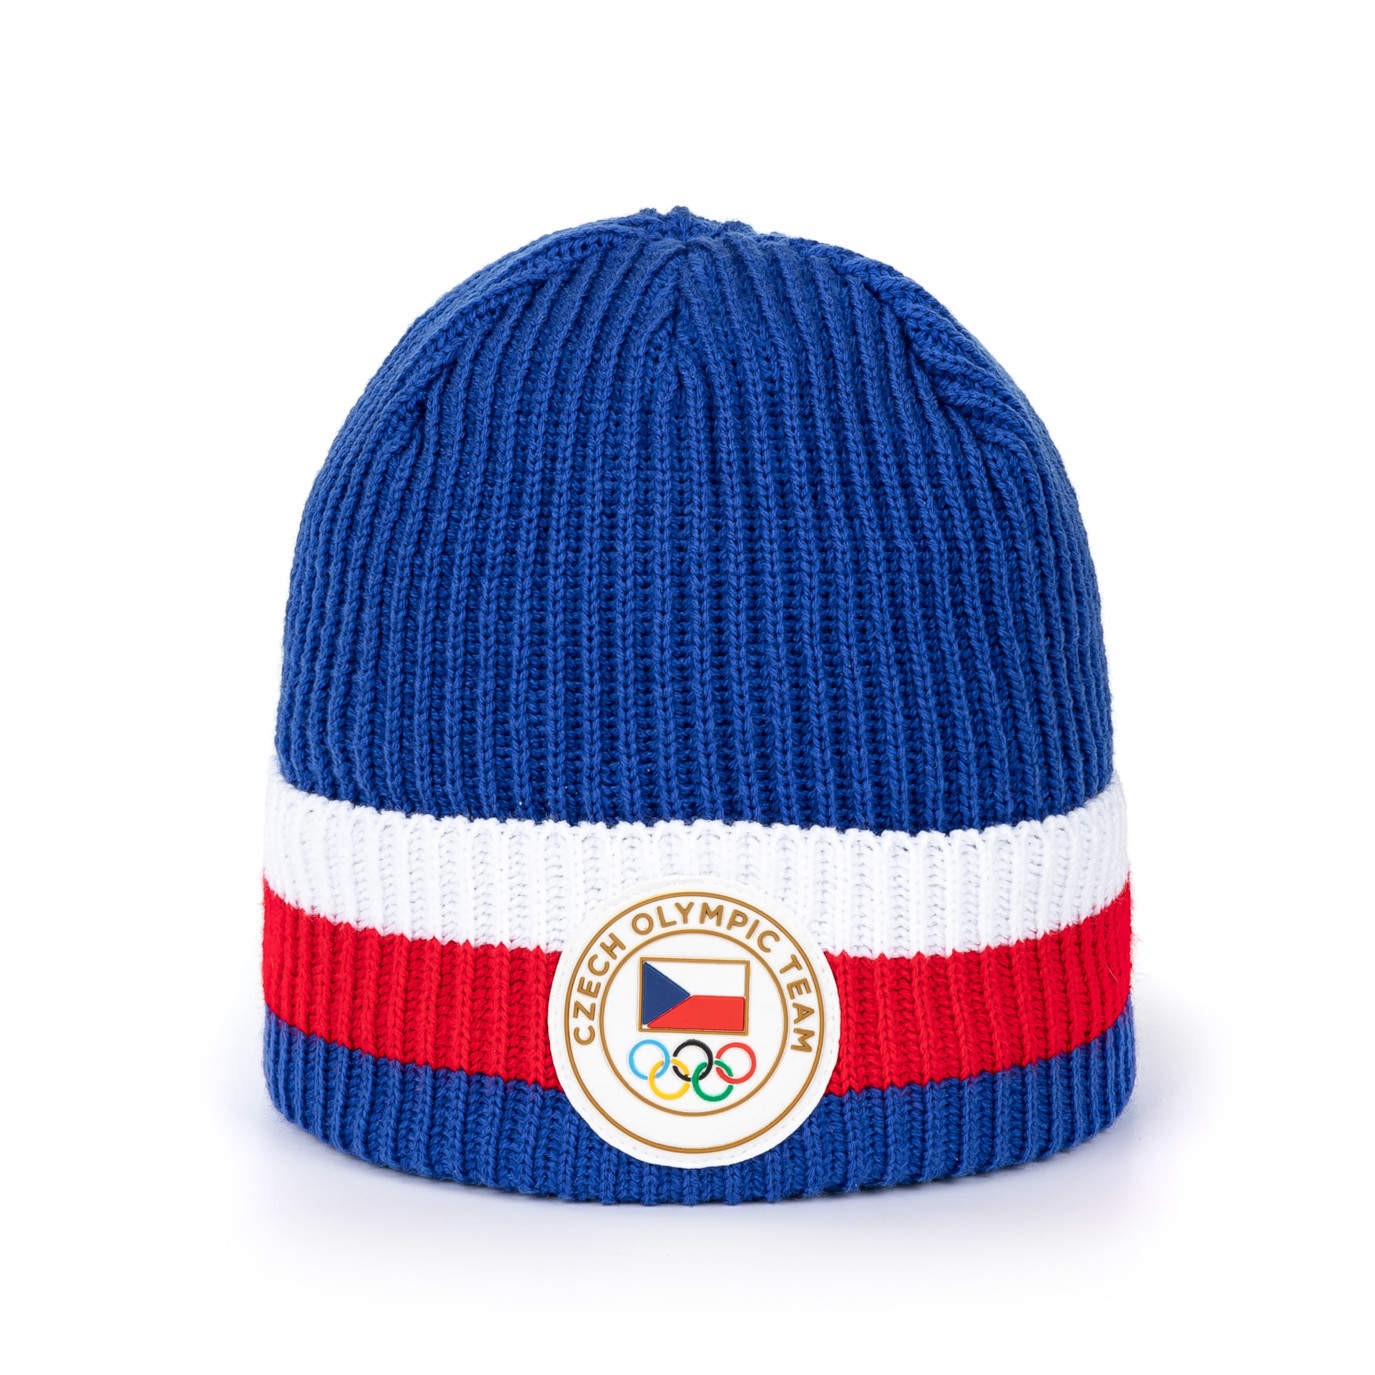 Knitted winter beanie from the Olympic collection ALPINE PRO RASKOVKA 2 reflex blue variant s